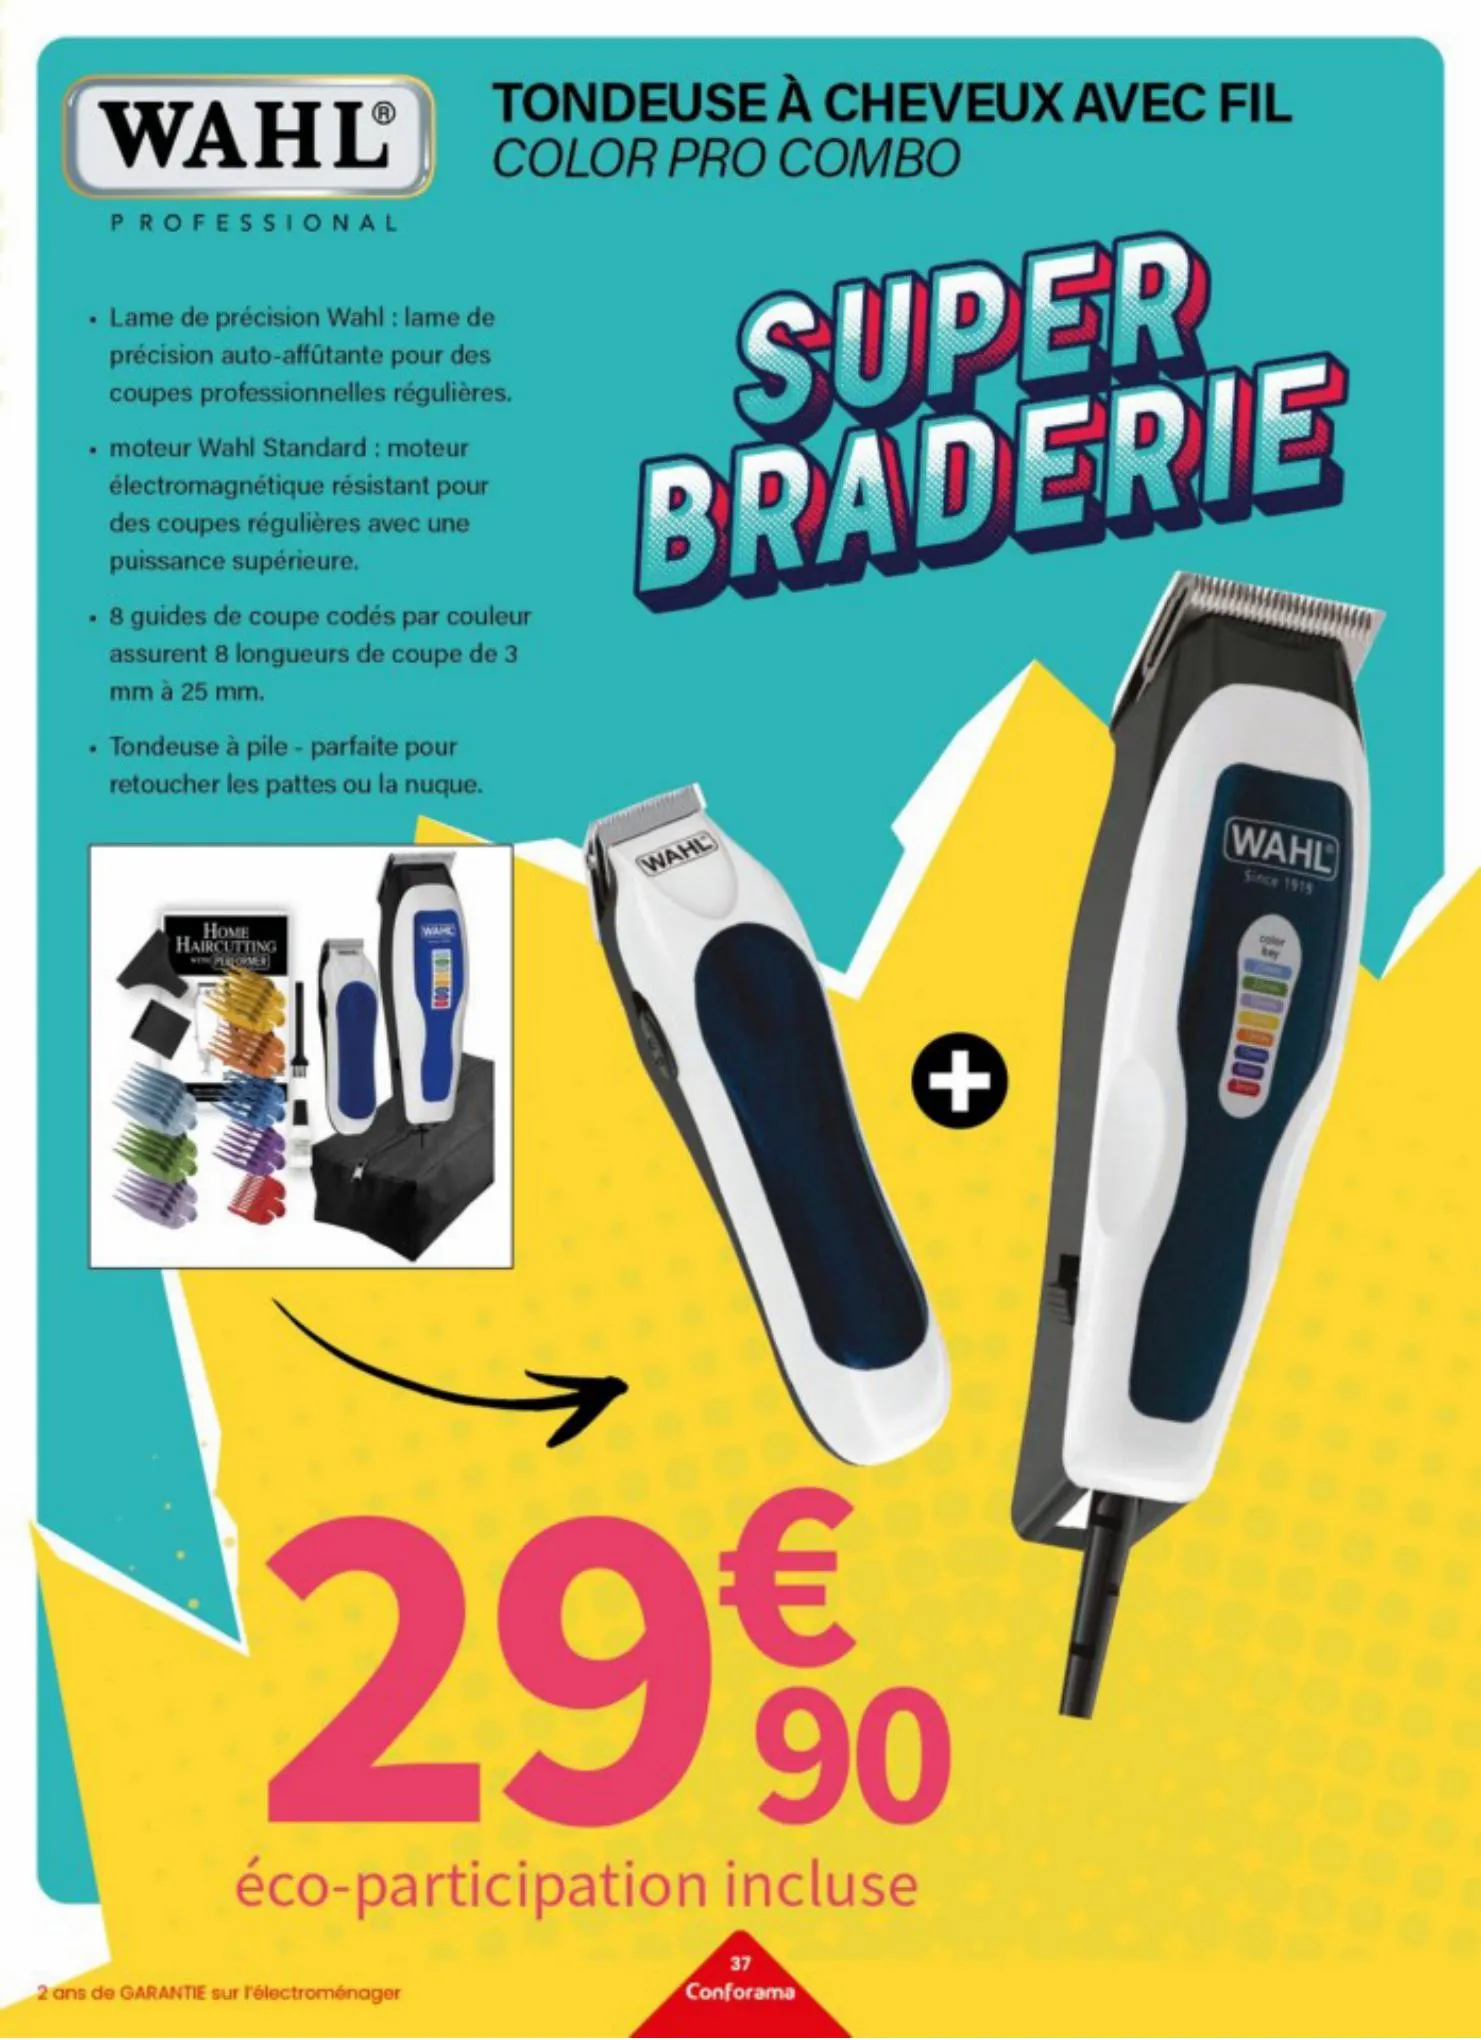 Catalogue Super braderie, page 00037